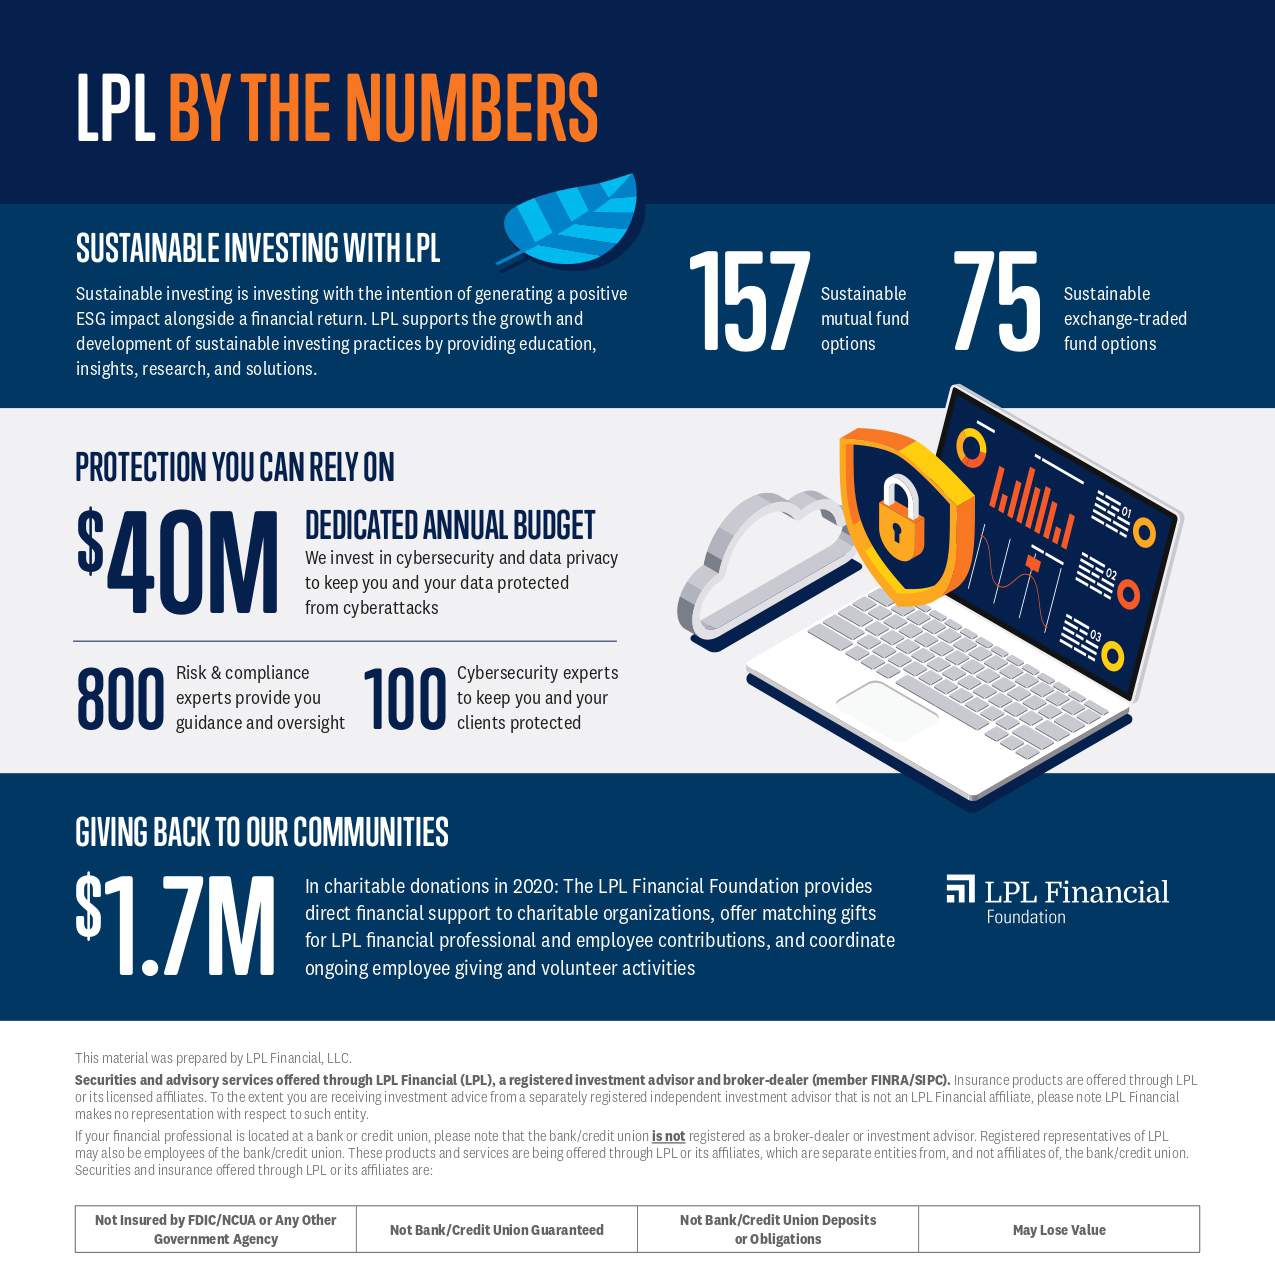 LPL By the Numbers